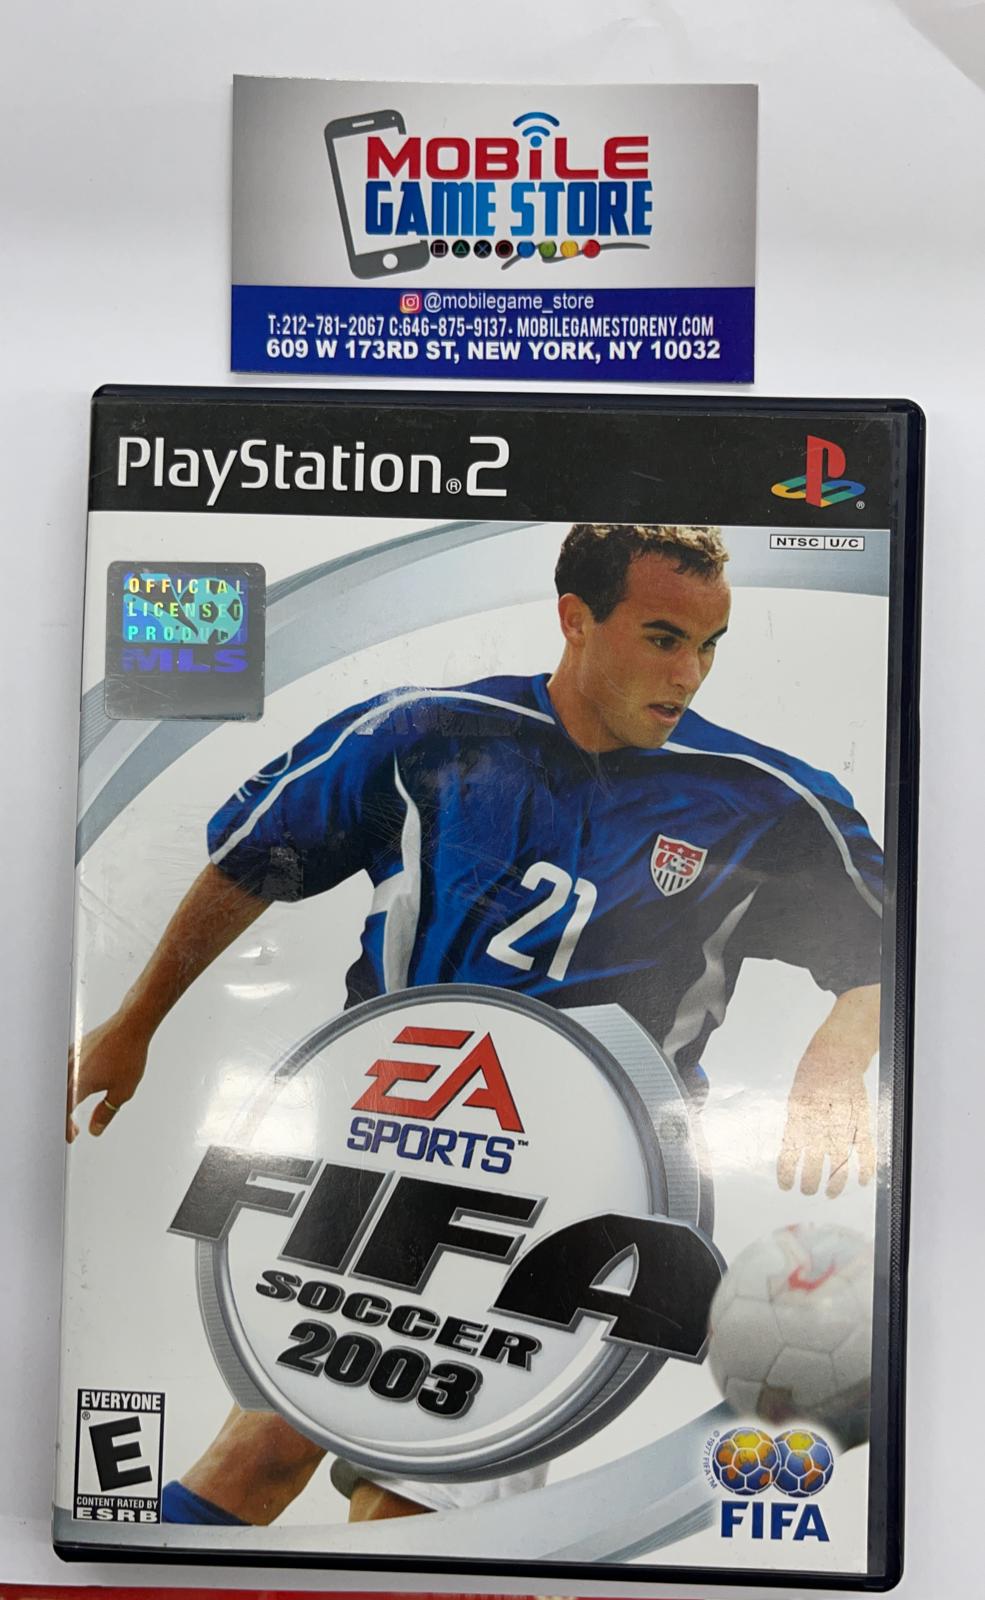 FIFA Soccer 2003 (PRE-OWNED)